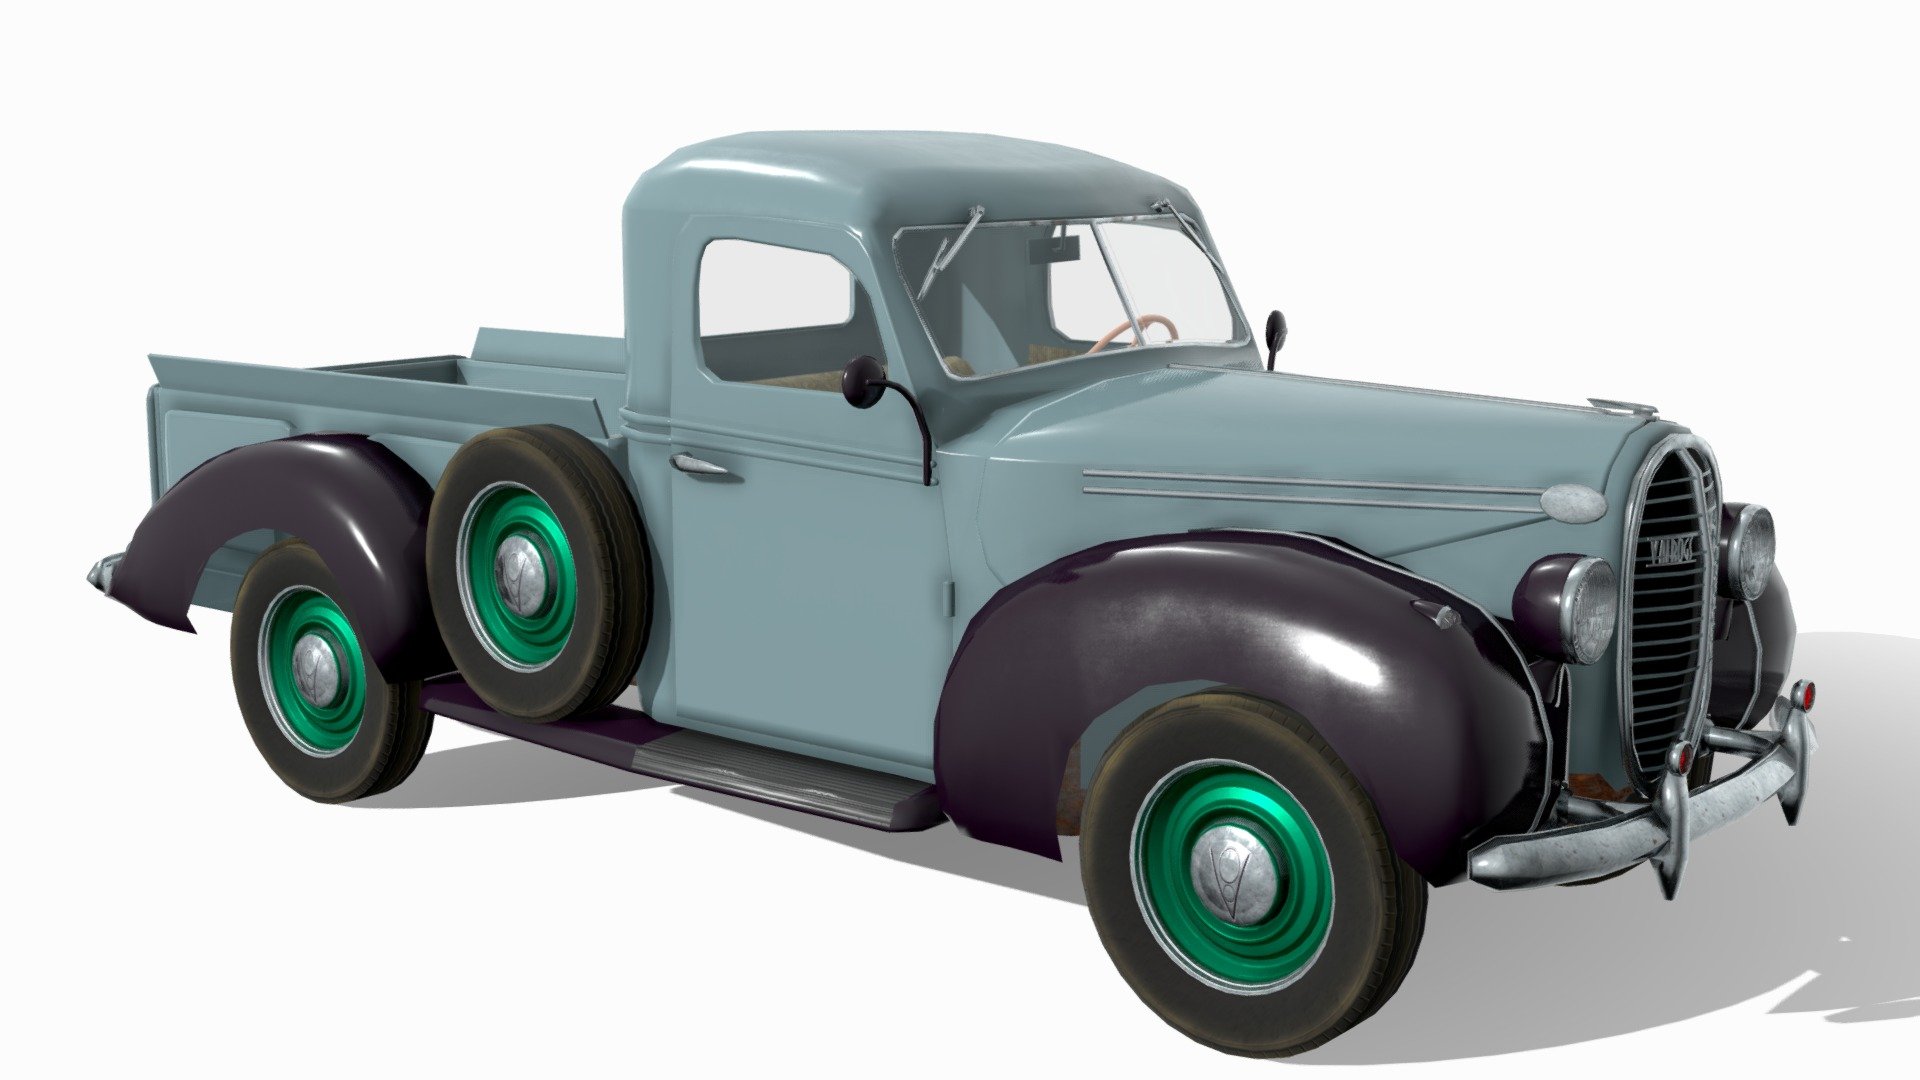 1938 Ford V8 Pick-up truck, branded as Vairogs (Lat: ‘shield’) for the Latvian market. 3D model based on my previous works, below 50k tris, low poly tyres and wheels. .zip file contains all textures and a .blend file. Model is not triangulized, so if you wish, it should be easy to modify it!

If you wish to request a custom model, or have any questions, email me at libaumedia@outlook.com Thank you, Robin of Libau Media 3d model